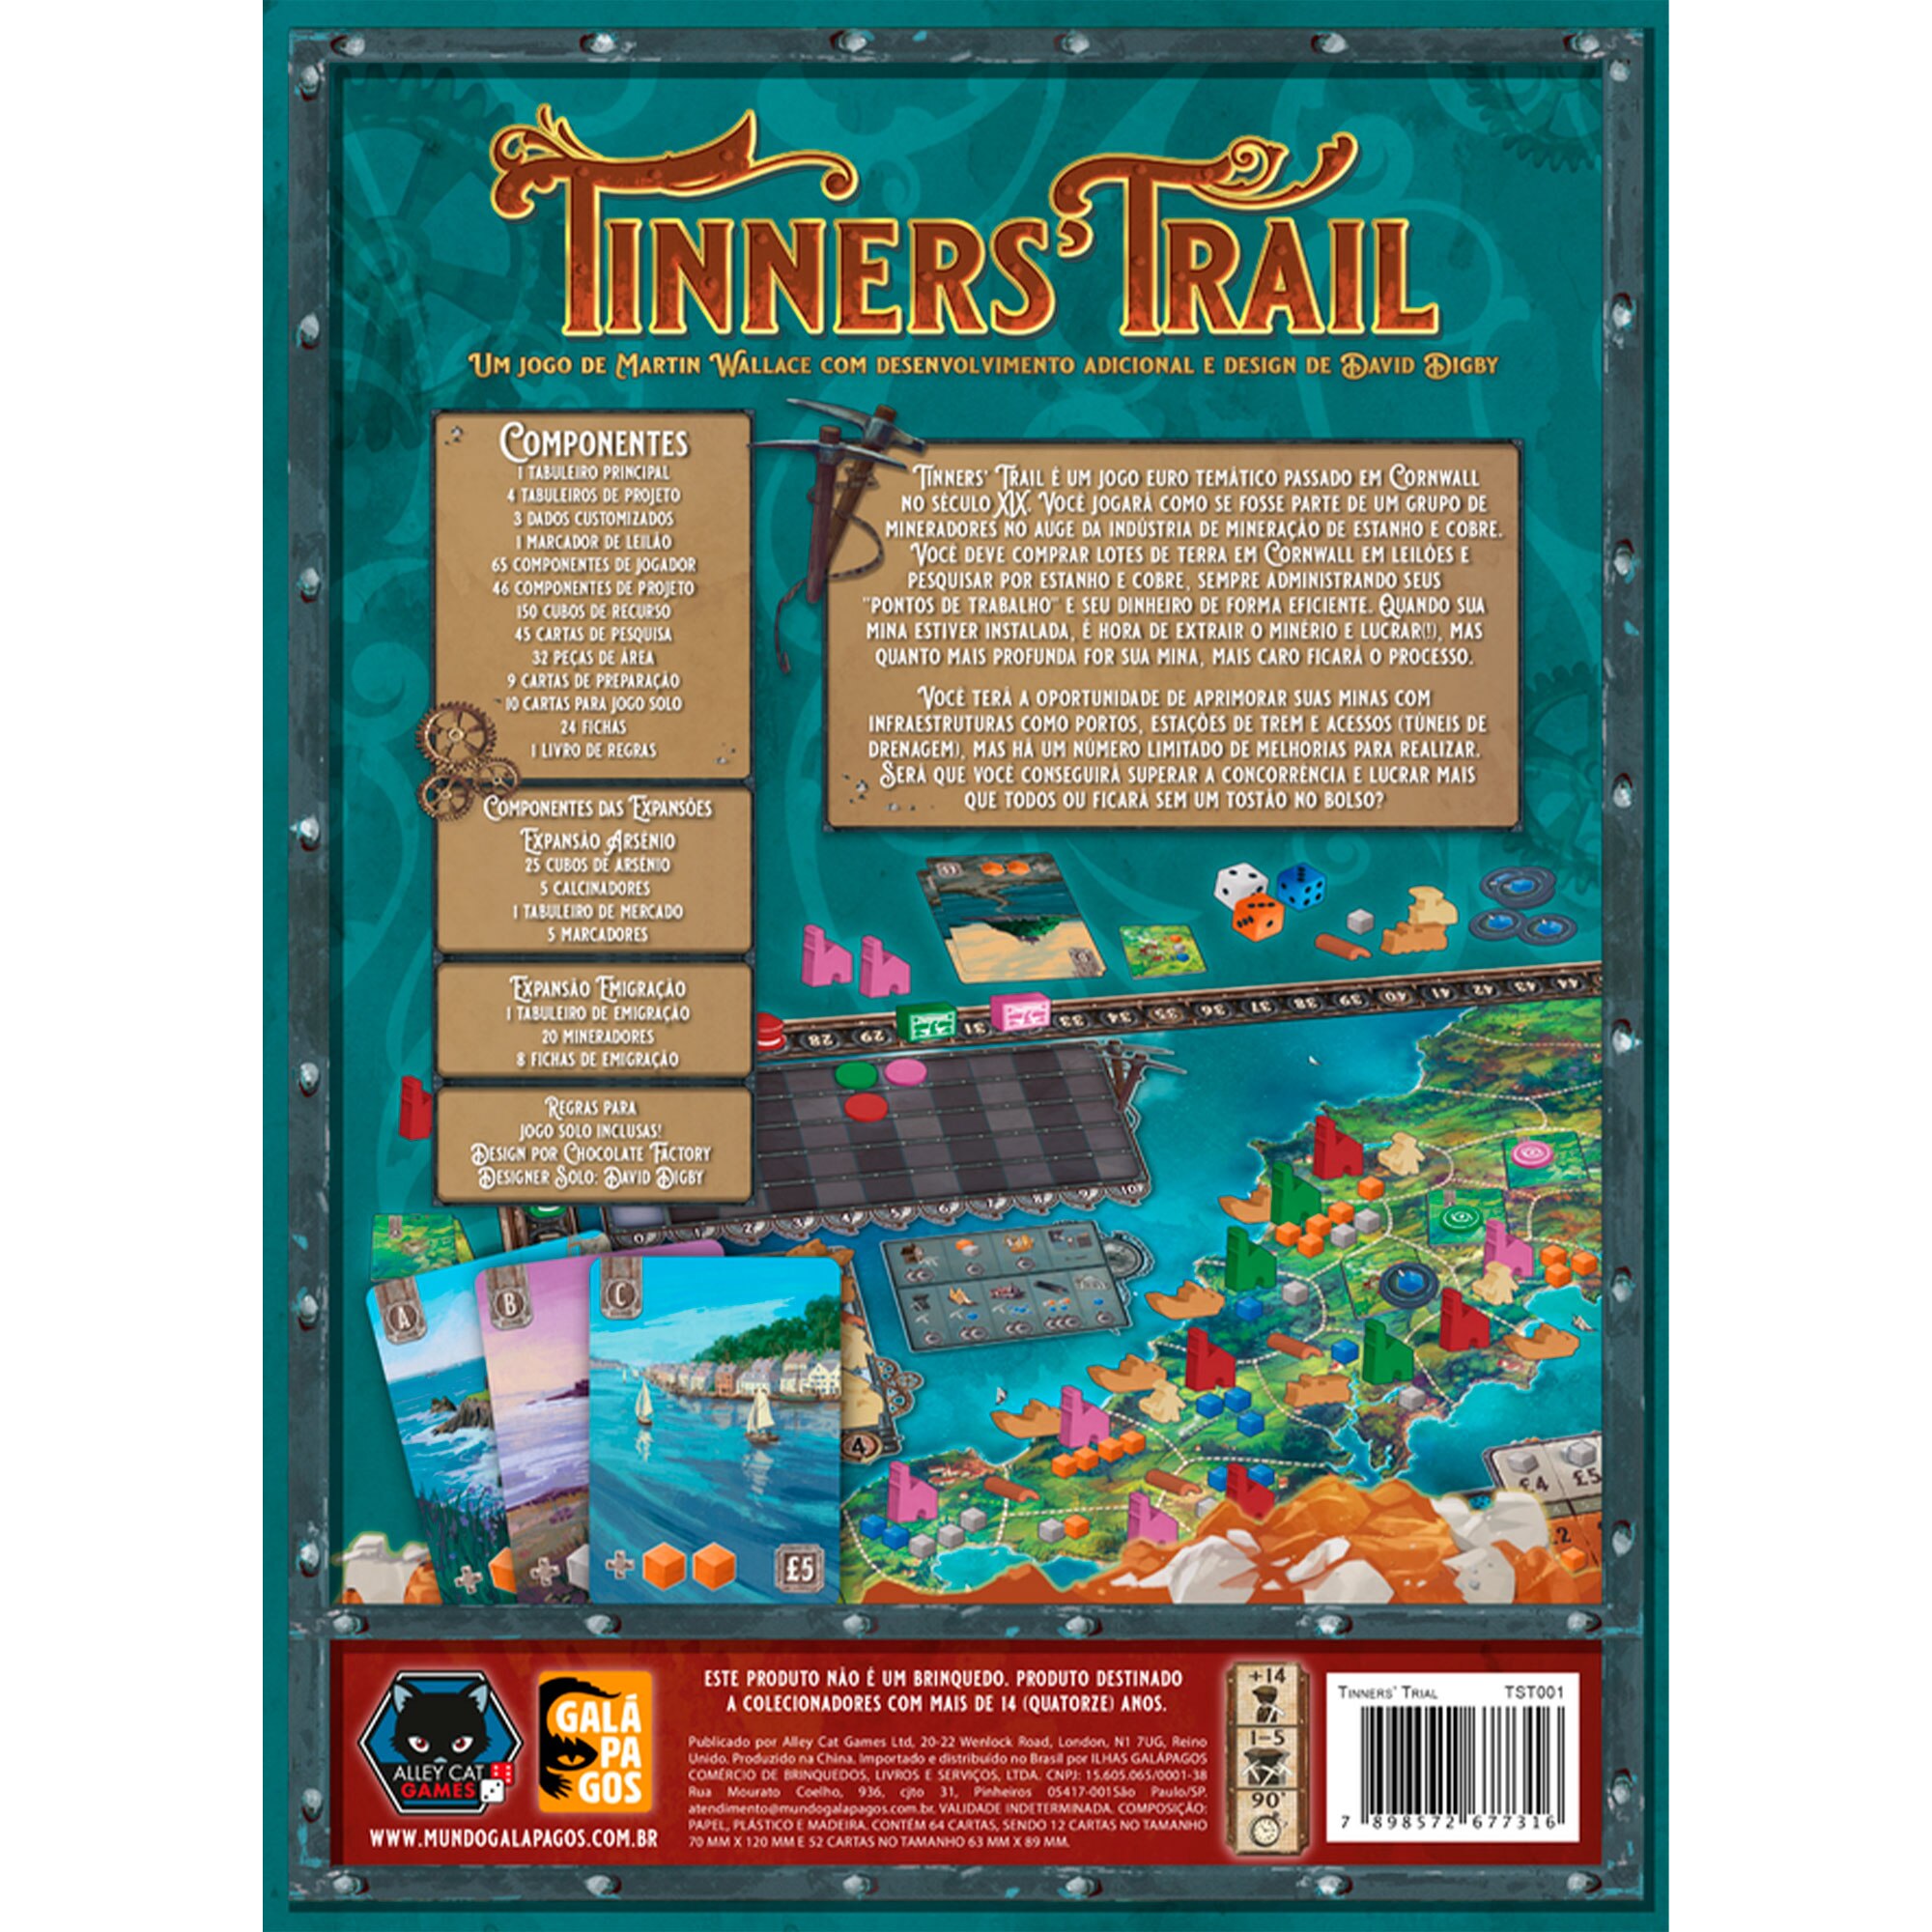 TINNERS' TRAIL  Regras + Review 